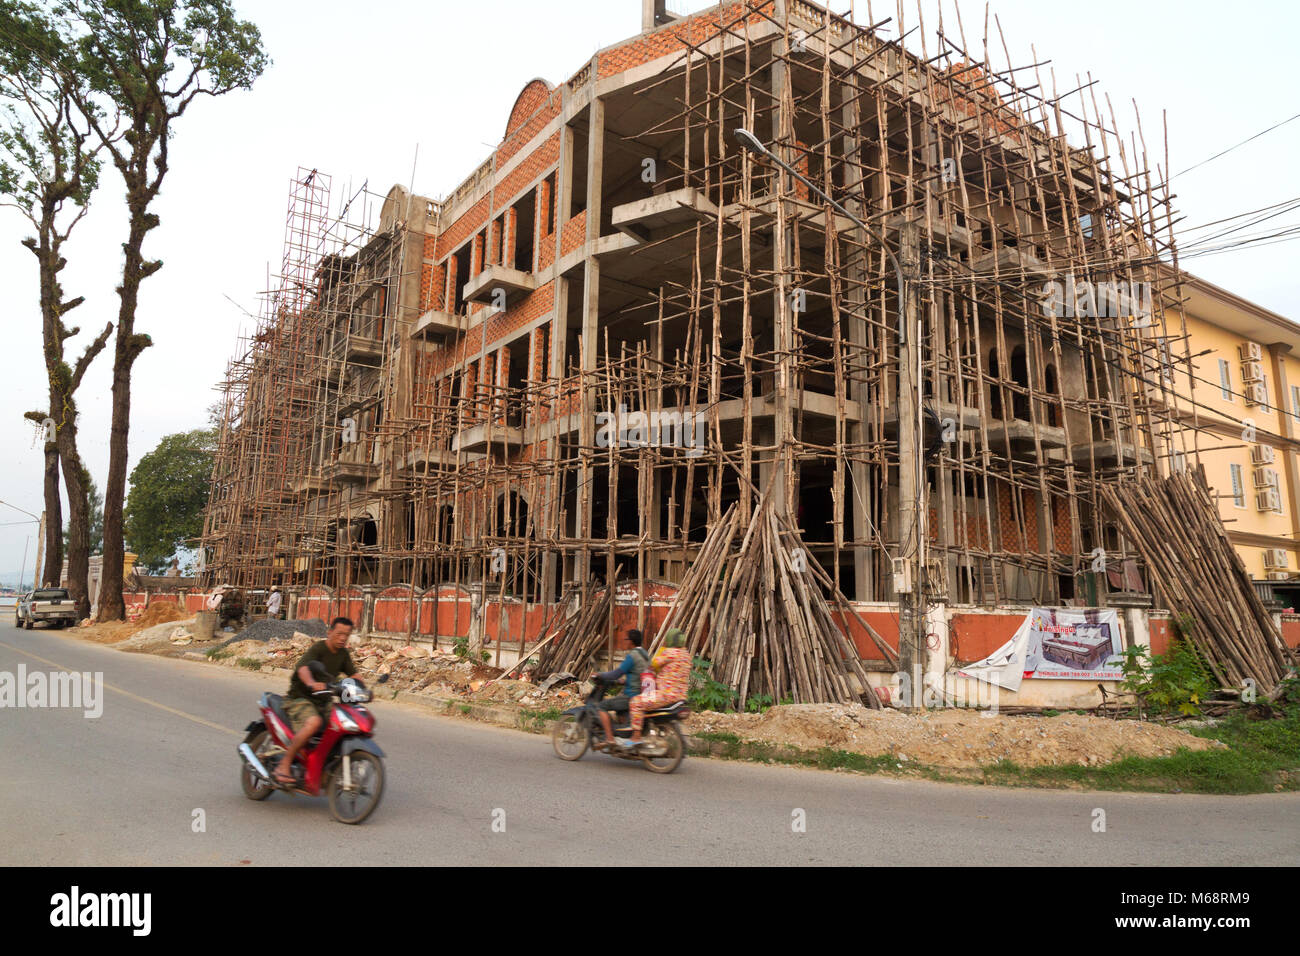 Restoration of old buildings using bamboo scaffolding; Kampot, Cambodia Asia Stock Photo